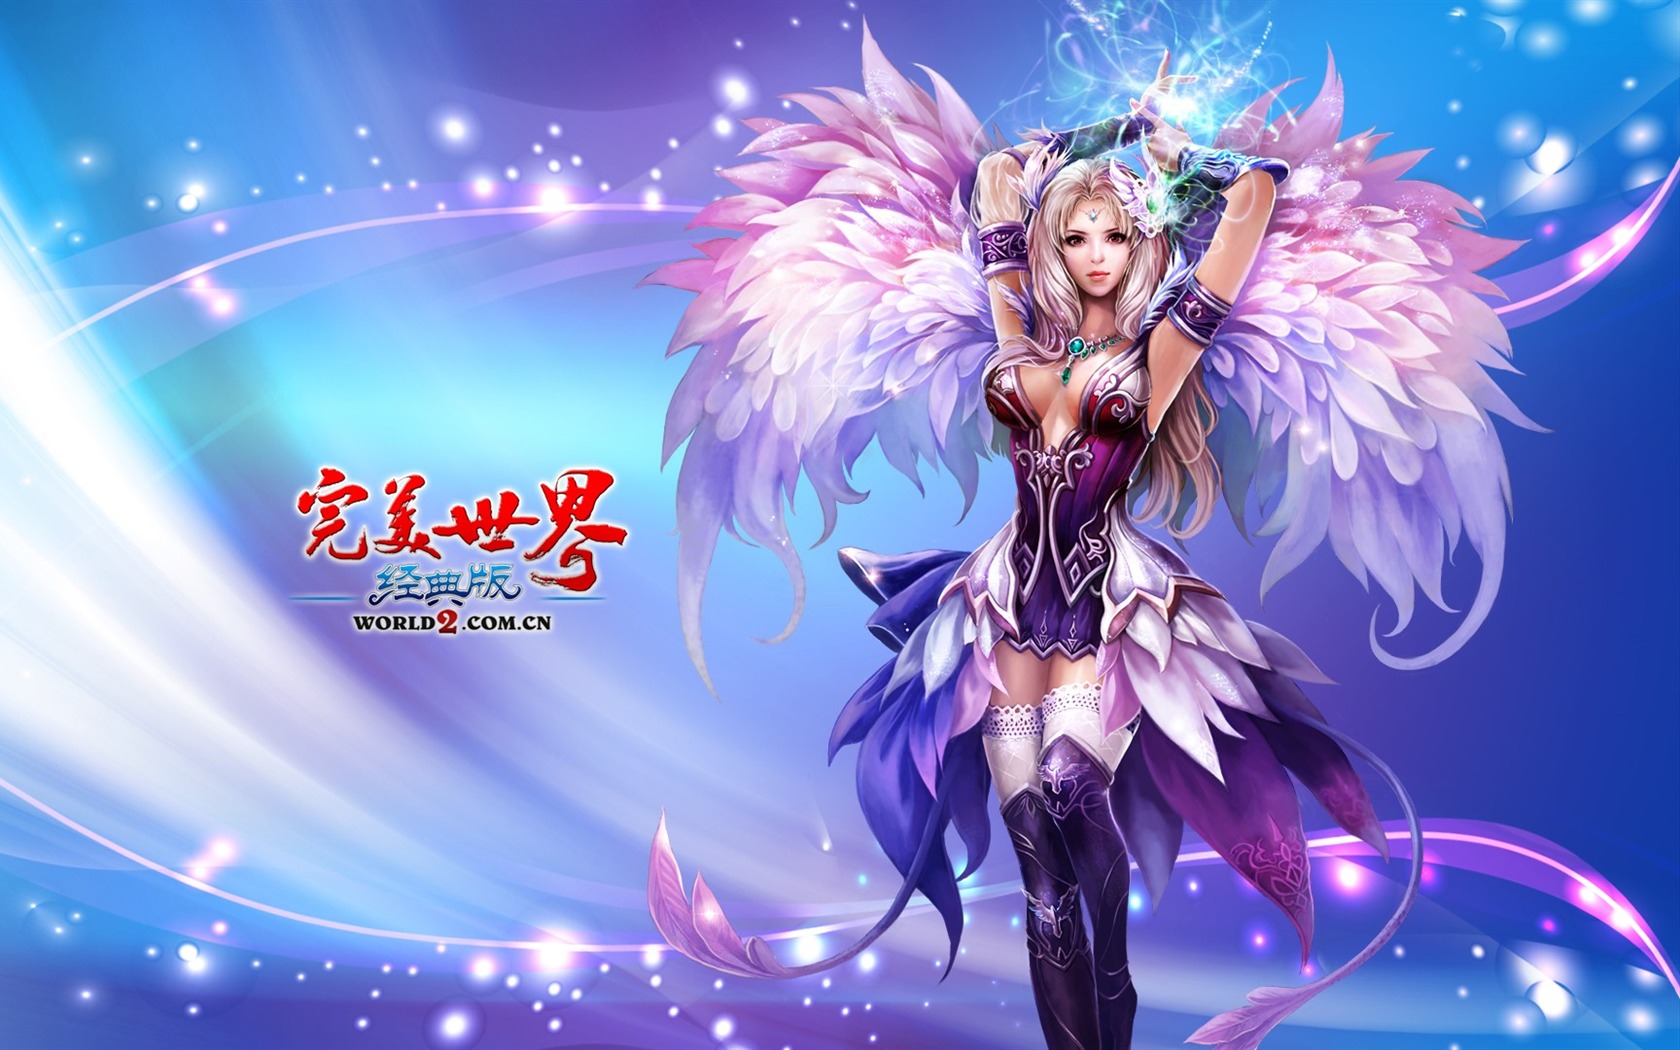 Online game Perfect World Classic HD wallpapers #20 - 1680x1050